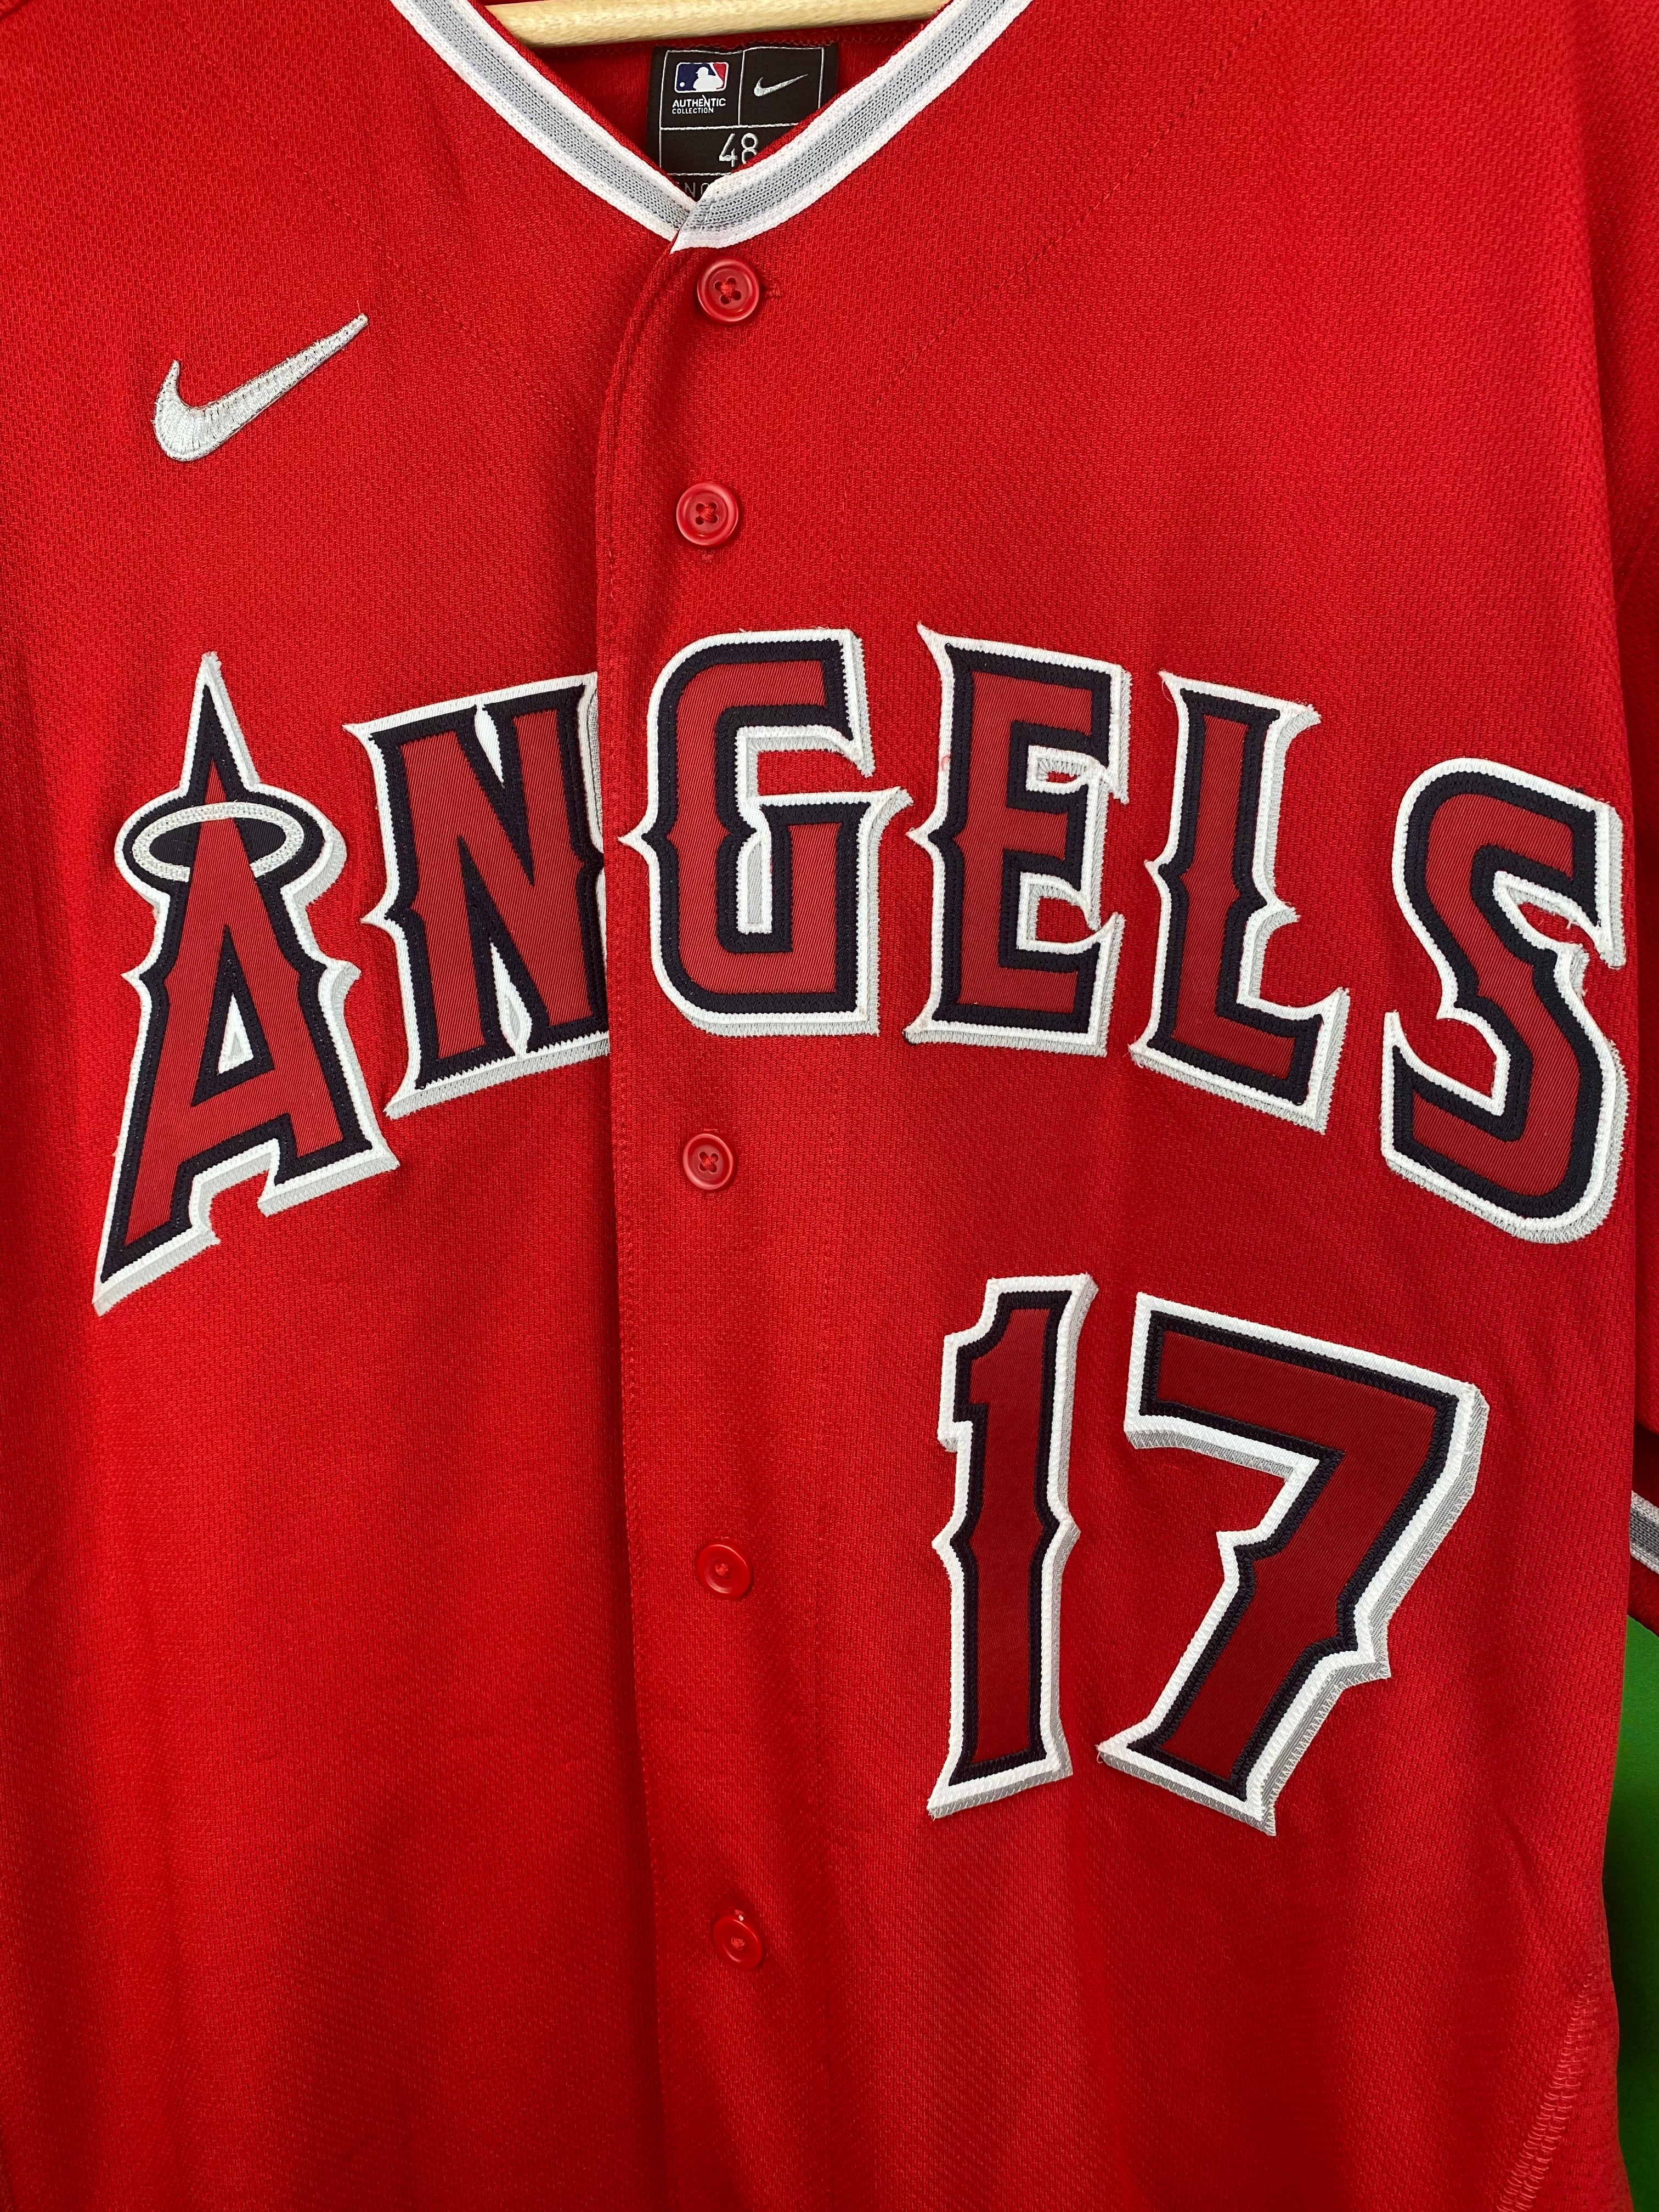 Shohei Ohtani Signed Jersey Los Angeles Angels – More Than Sports